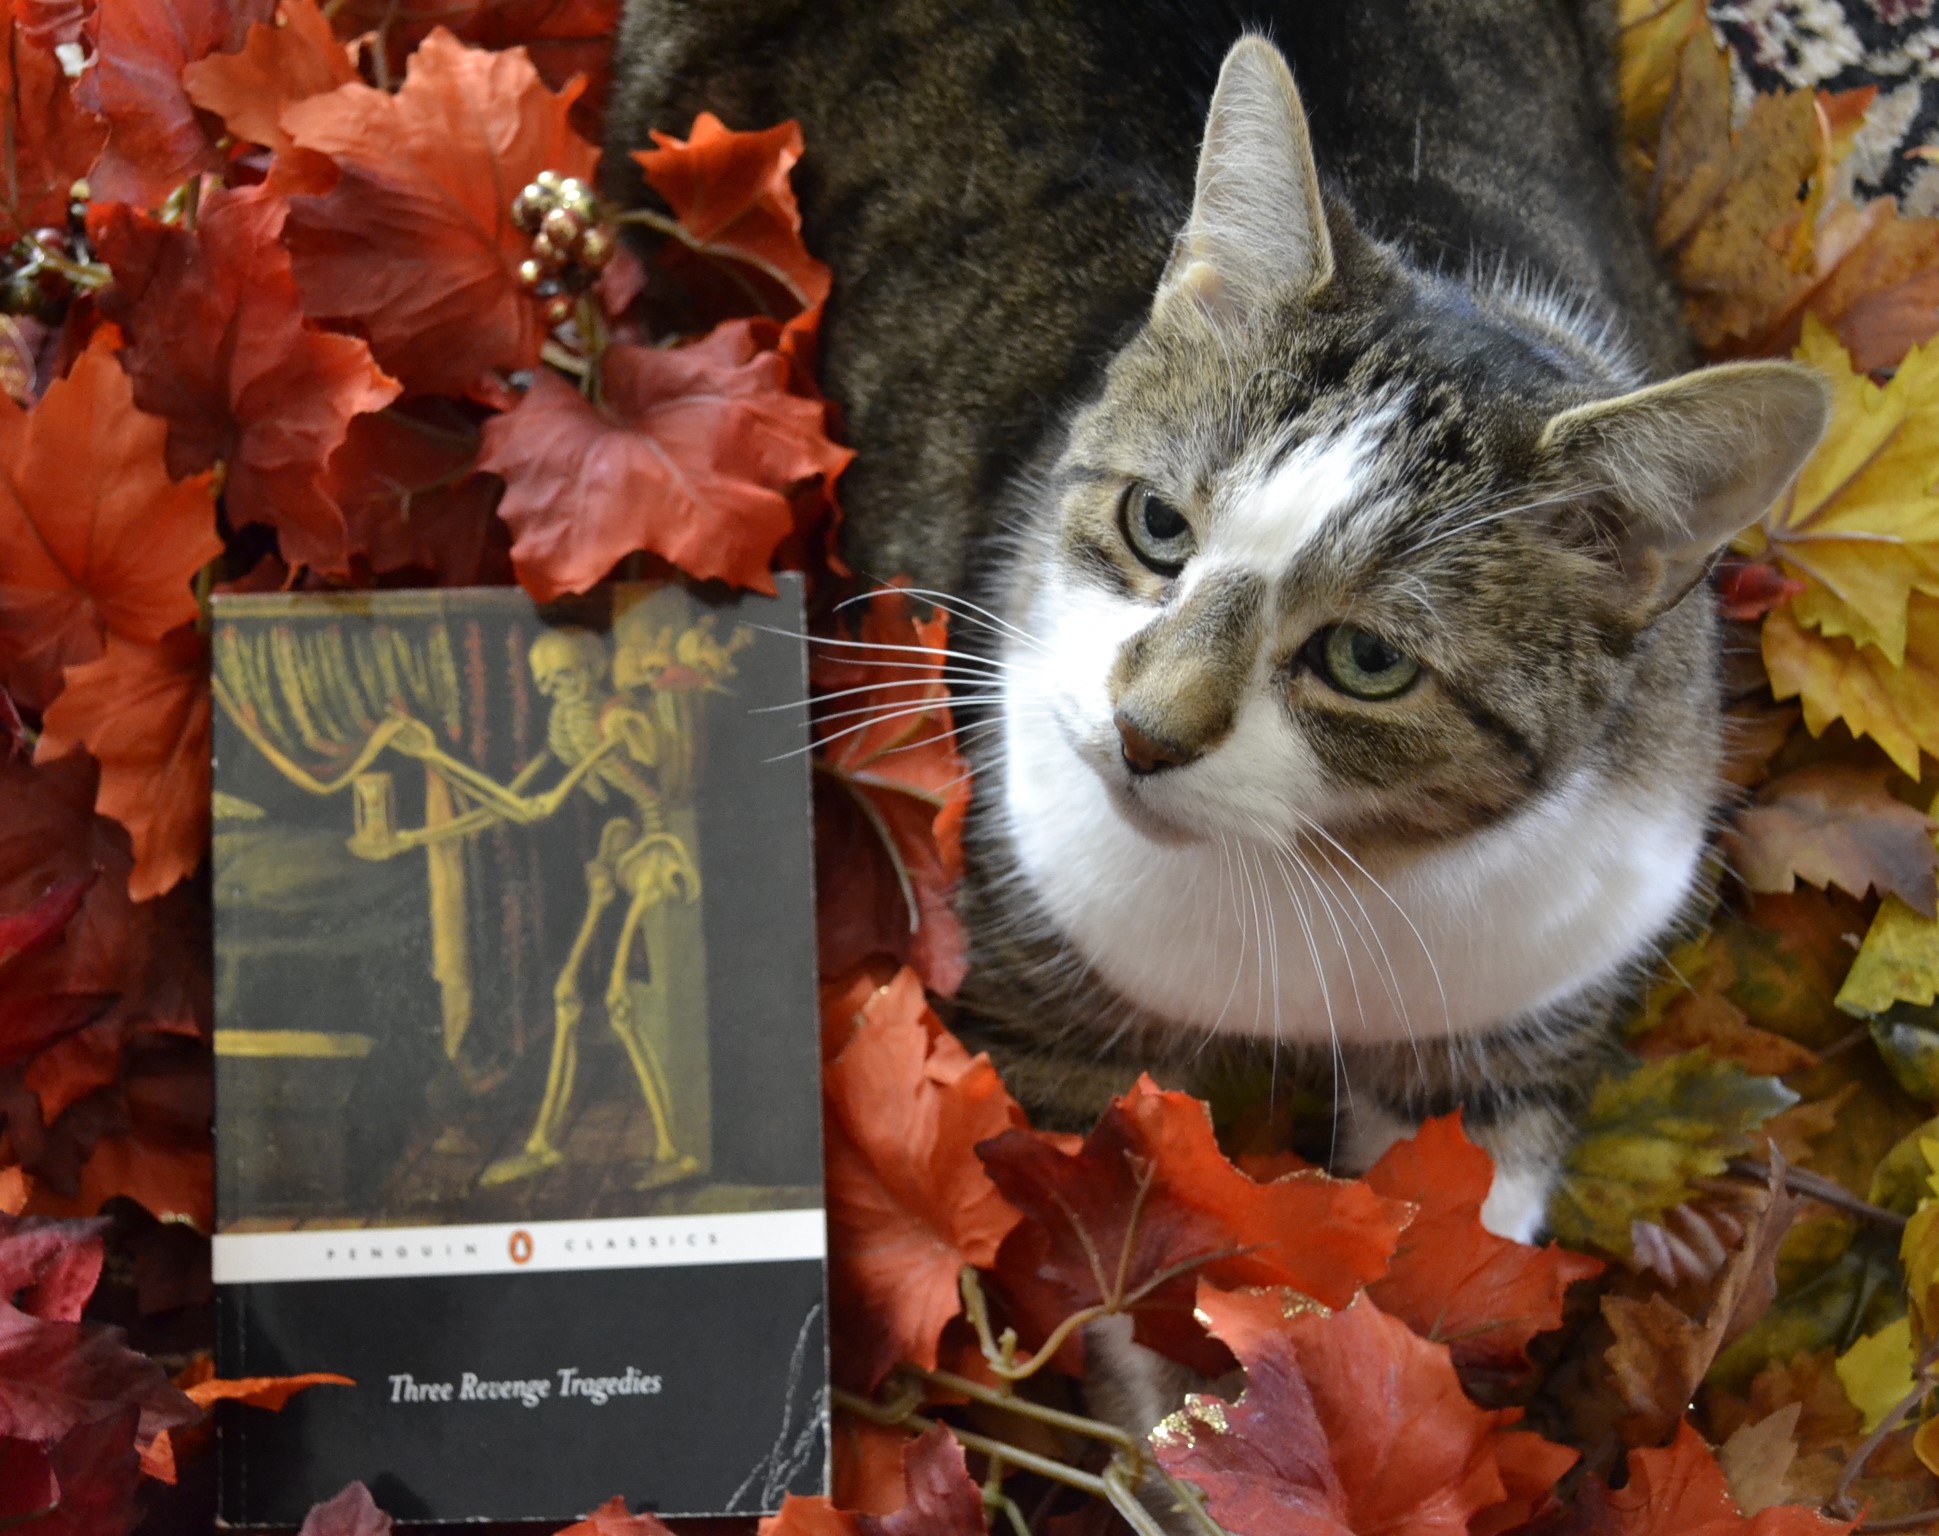 A tabby cat with big ears looks up from a pile of red and yellow leaves. A book lies beside her.